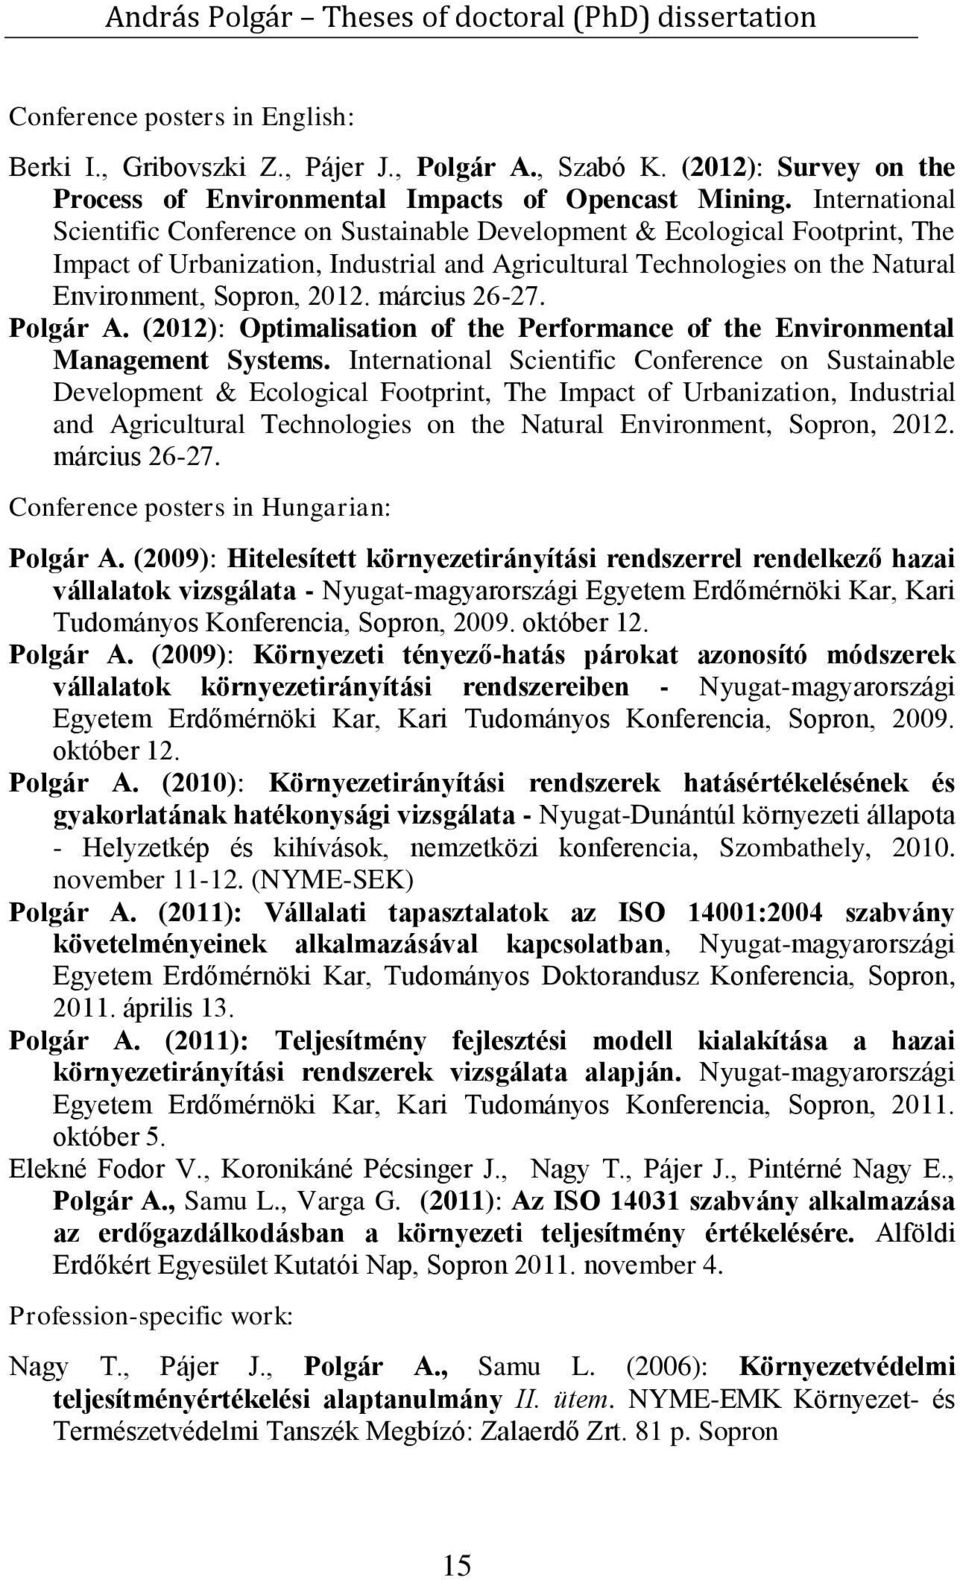 március 26-27. Polgár A. (2012): Optimalisation of the Performance of the Environmental Management Systems.  március 26-27. Conference posters in Hungarian: Polgár A.